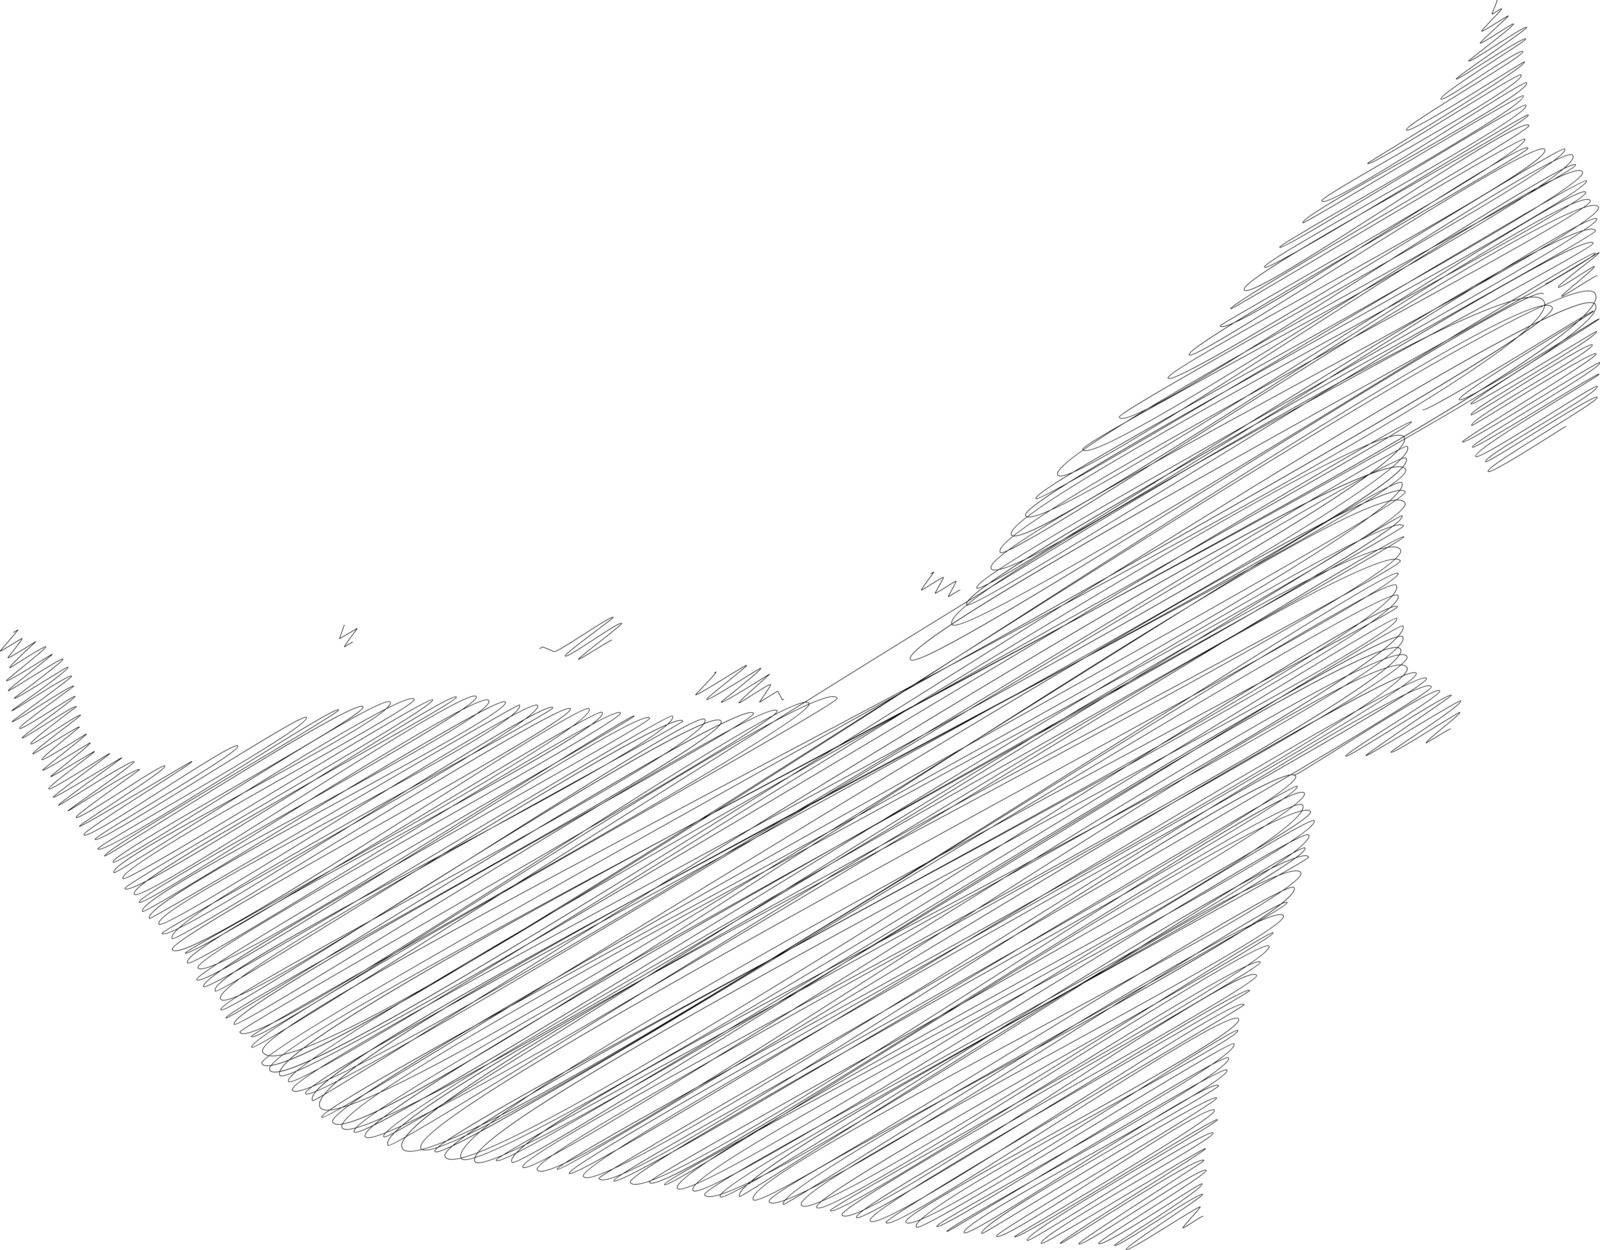 United Arab Emirates, UAE - pencil scribble sketch silhouette map of country area with dropped shadow. Simple flat vector illustration.